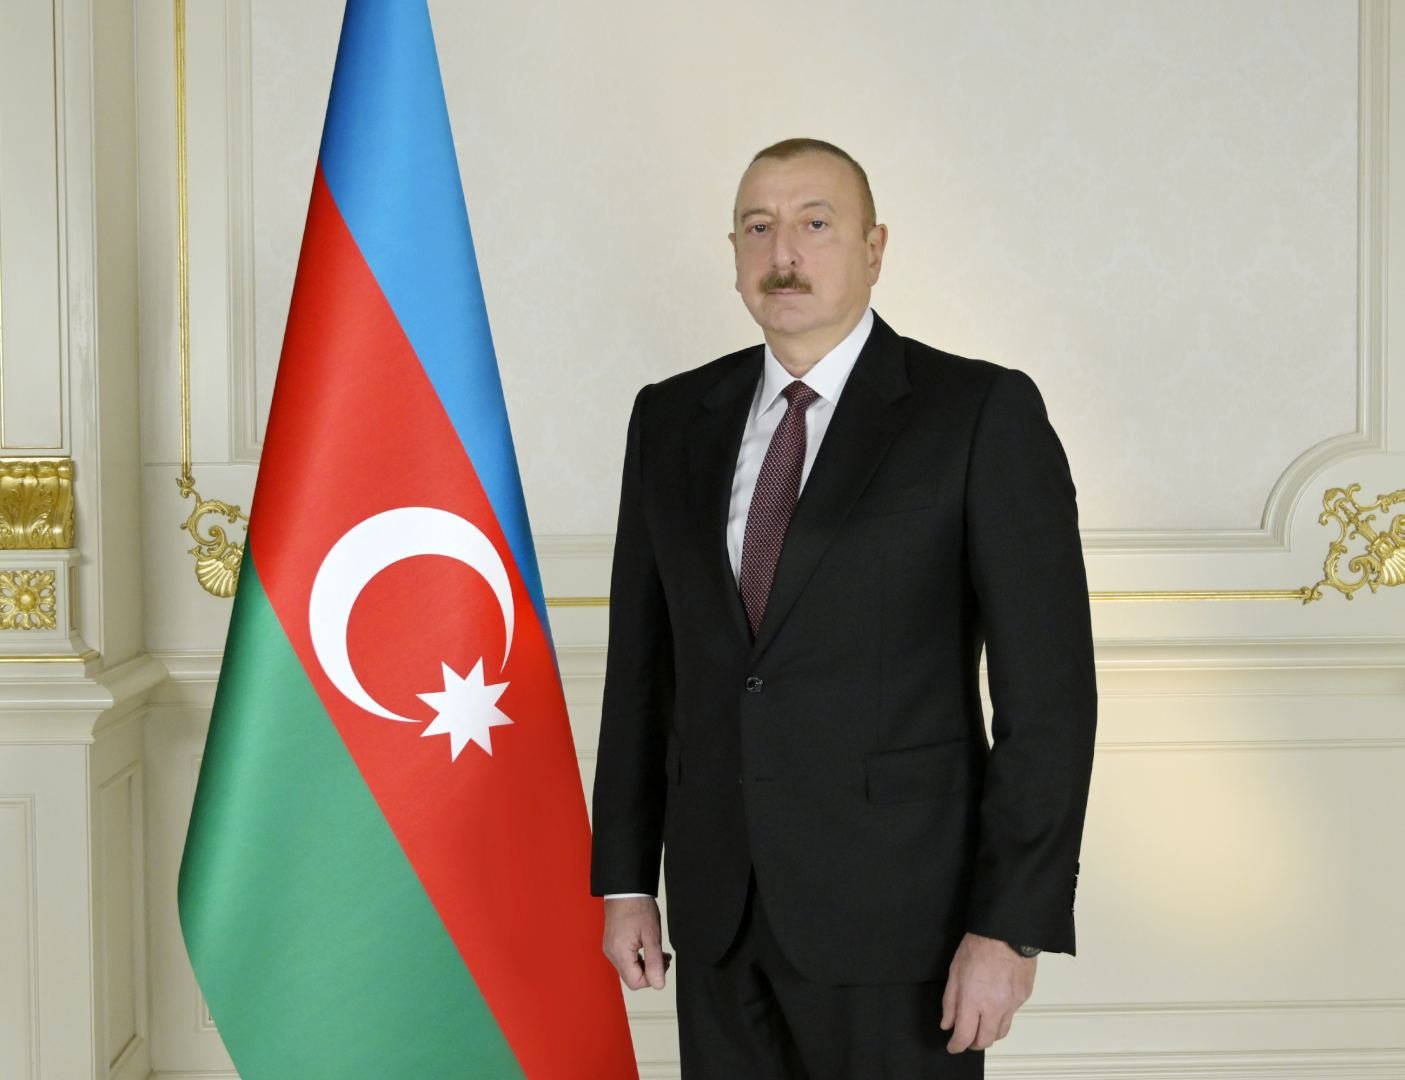 President Ilham Aliyev attends official reception in honor of heads of state, gov't attending 9th Summit of Organization of Turkic States in Samarkand